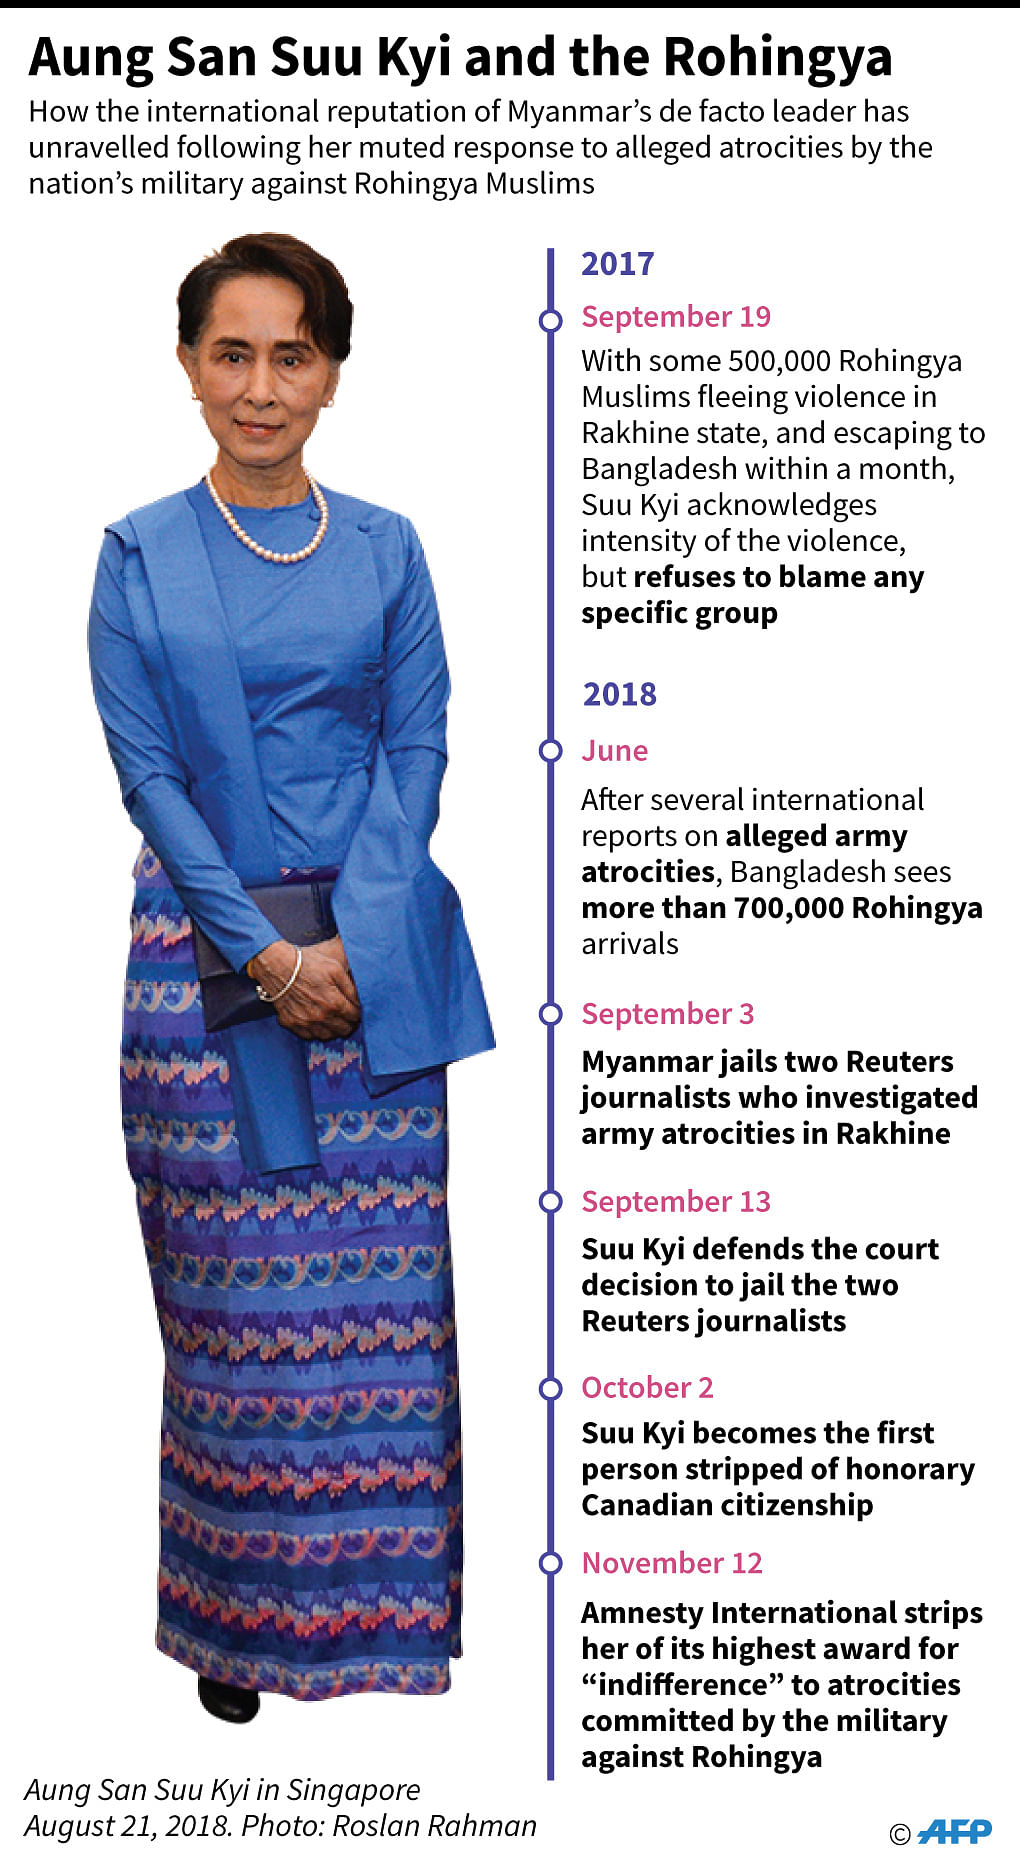 Timeline showing how Aung Sang Suu Kyi`s international reputation has unravelled following the Rohingya crisis in Myanmar. Photo: AFP